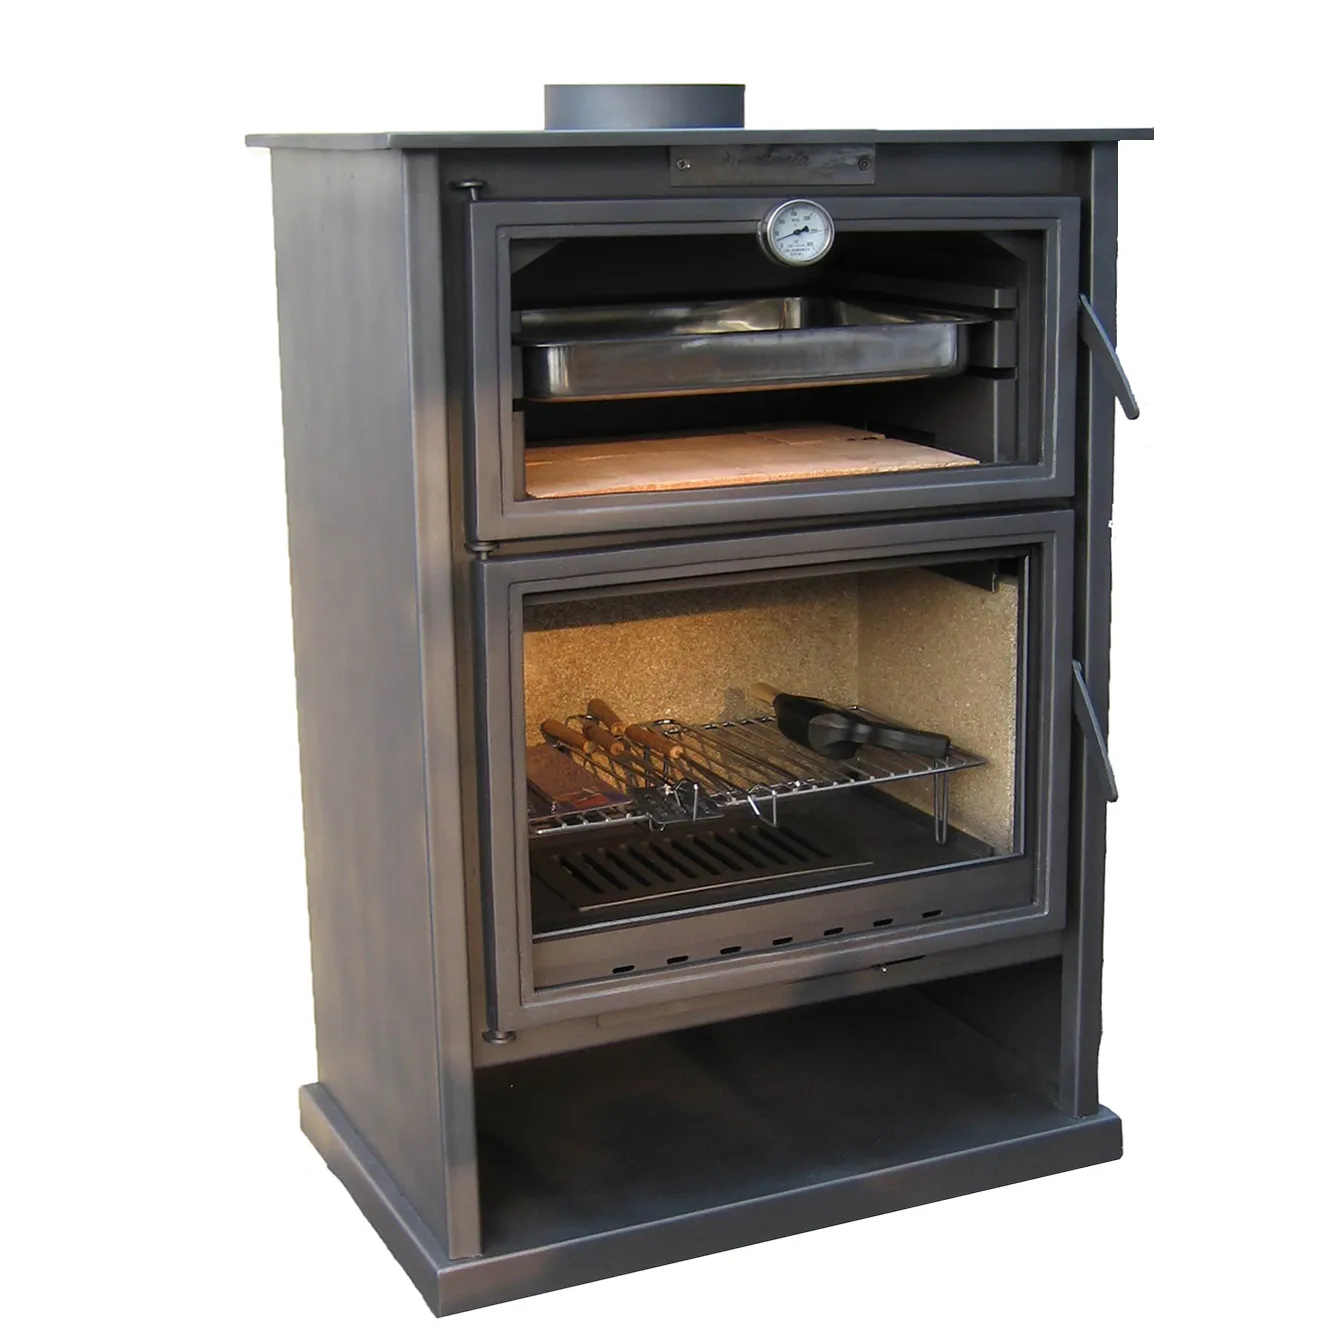 oven stoves wood fireplace with oven indoor pizza oven wood fired cooking stove